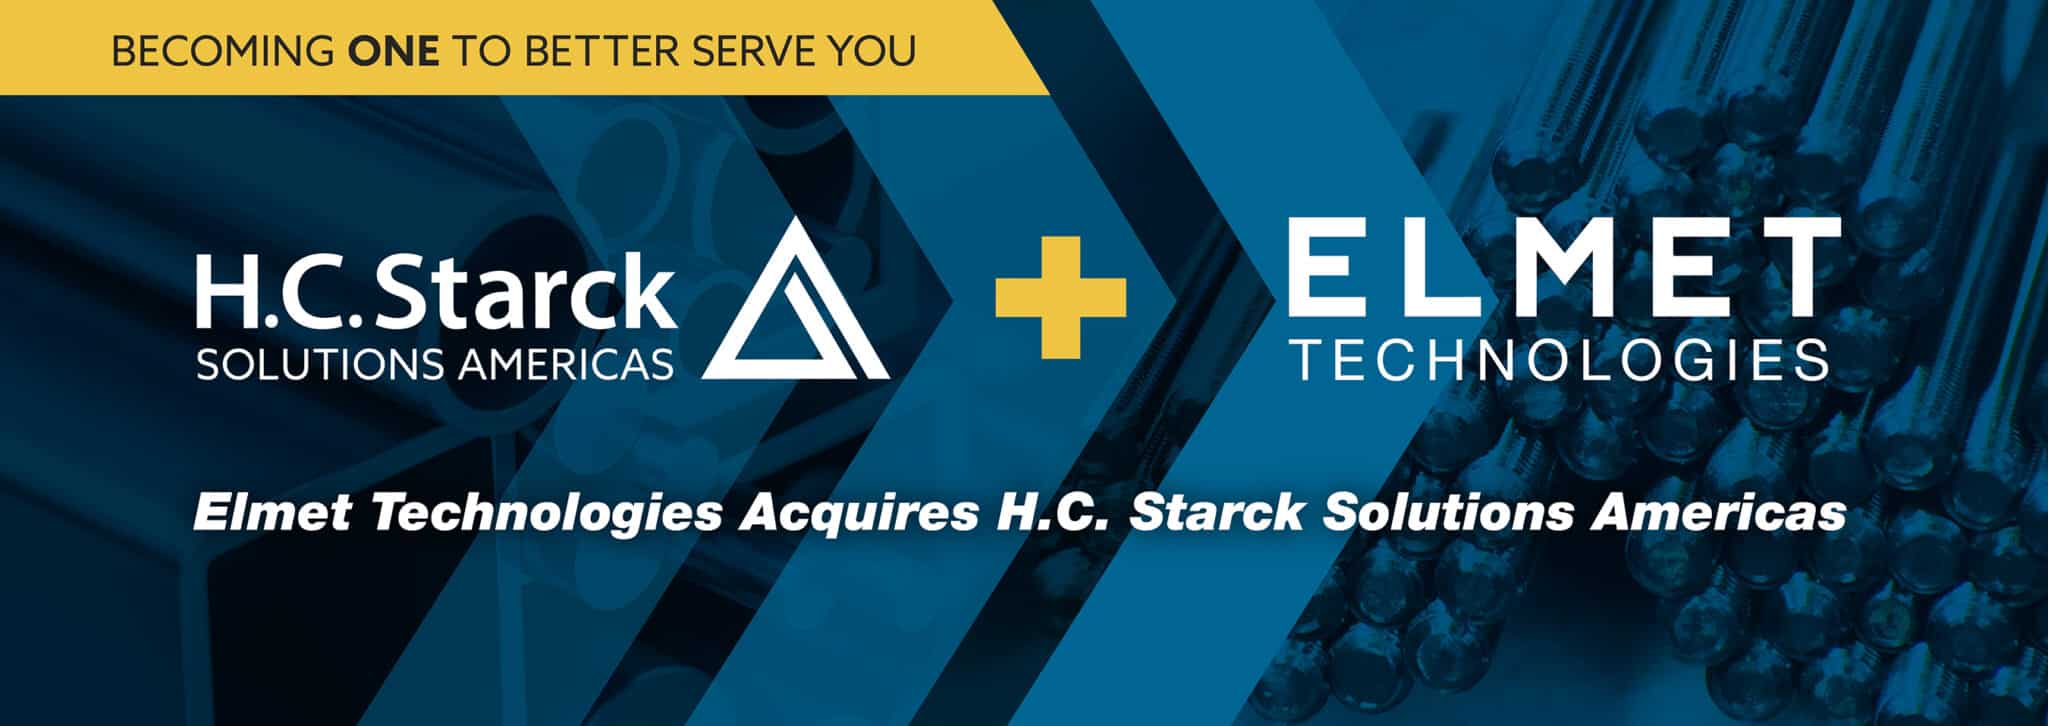 Becoming One to Better Serve You - Elmet Technologies acquires H.C. Starck solutons